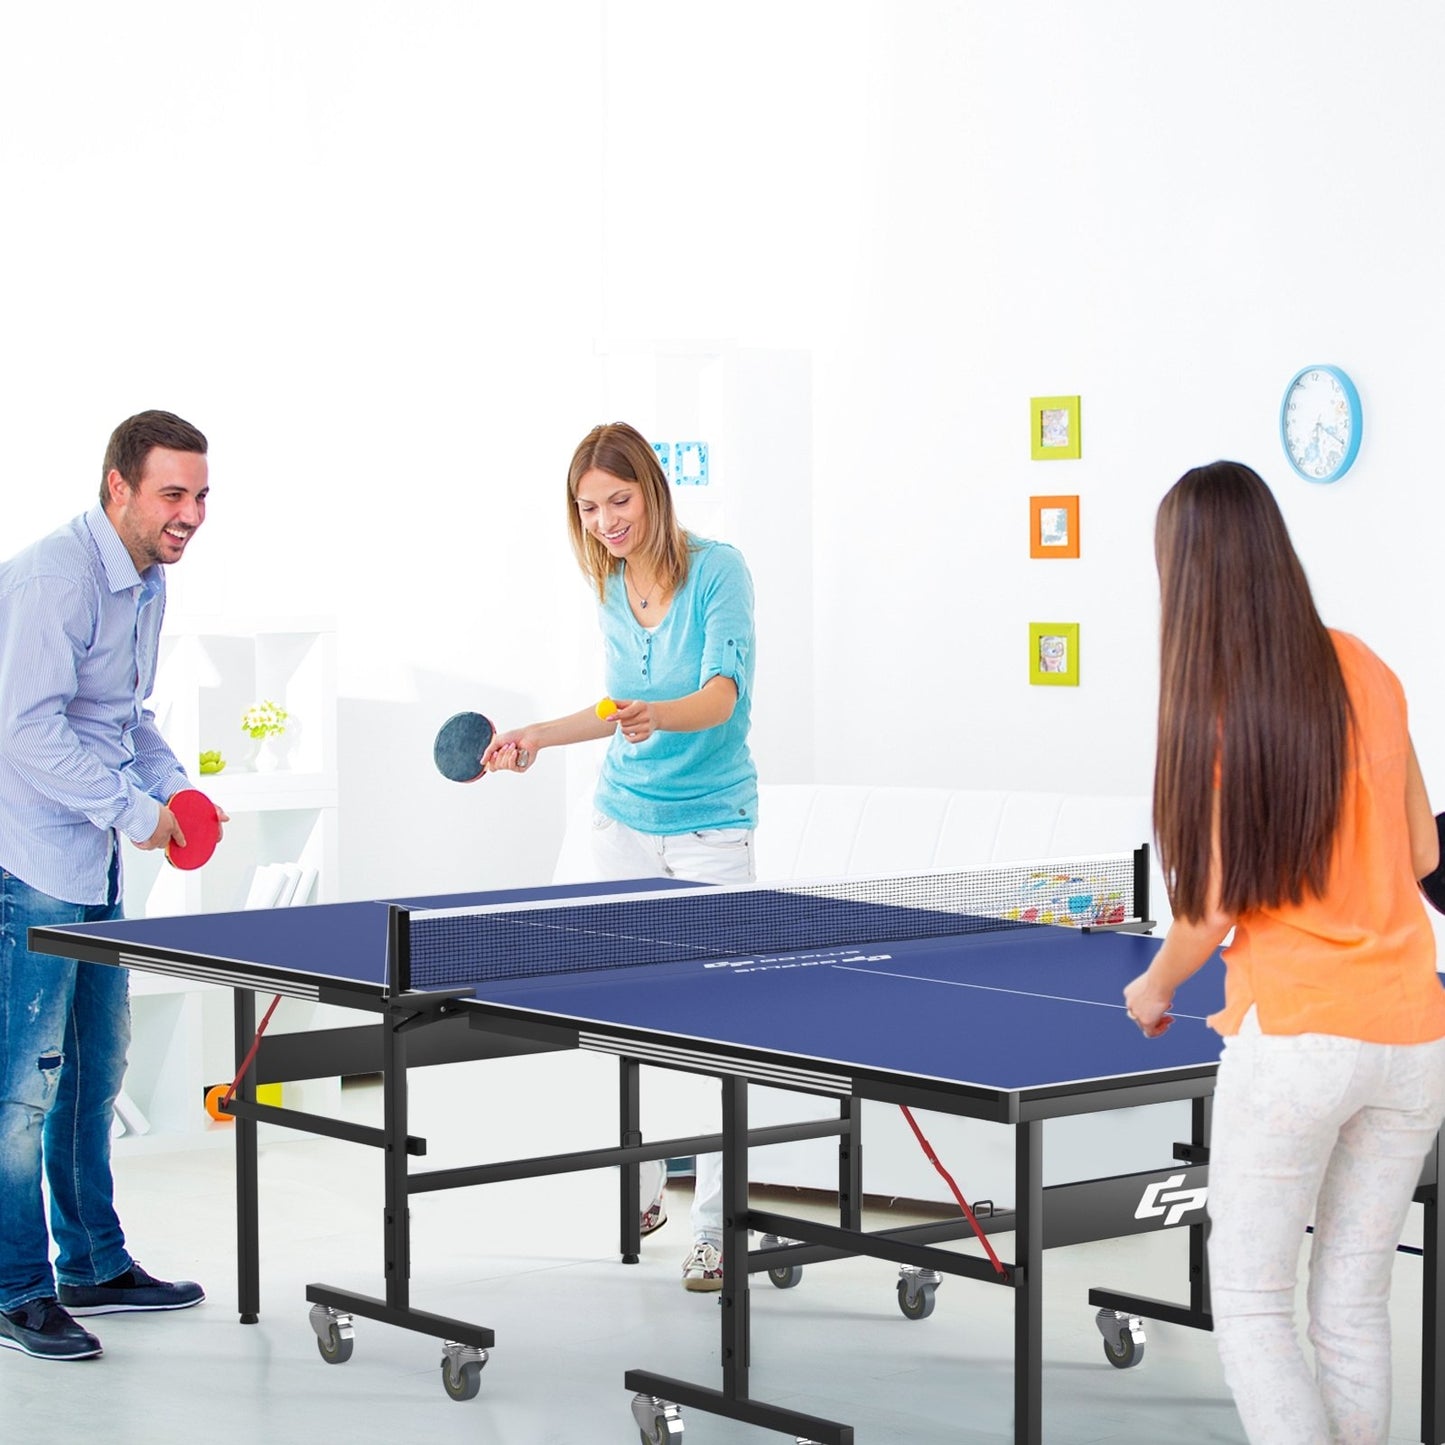 9 x 5 Feet Foldable Table Tennis Table with Quick Clamp Net and Post Set, Blue